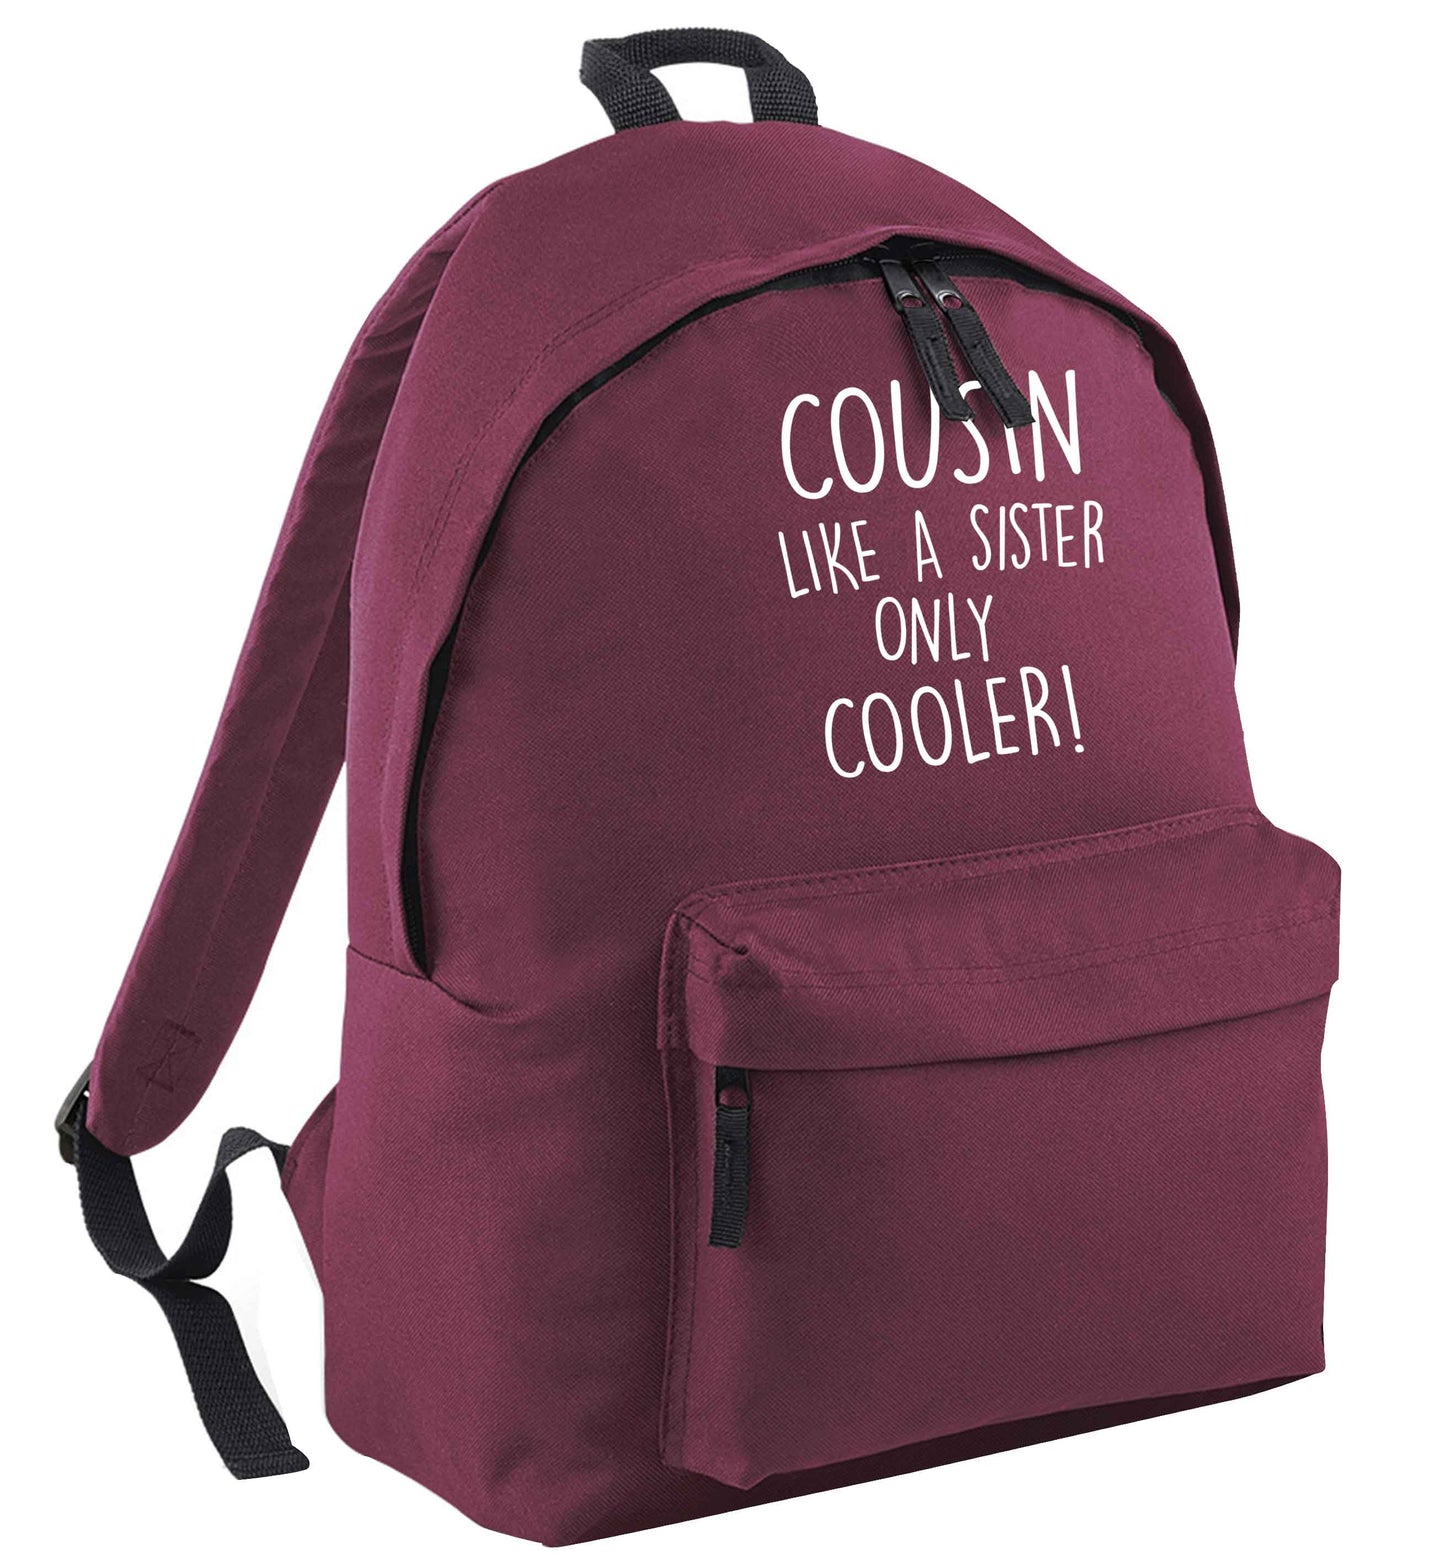 Cousin like a sister only cooler | Children's backpack